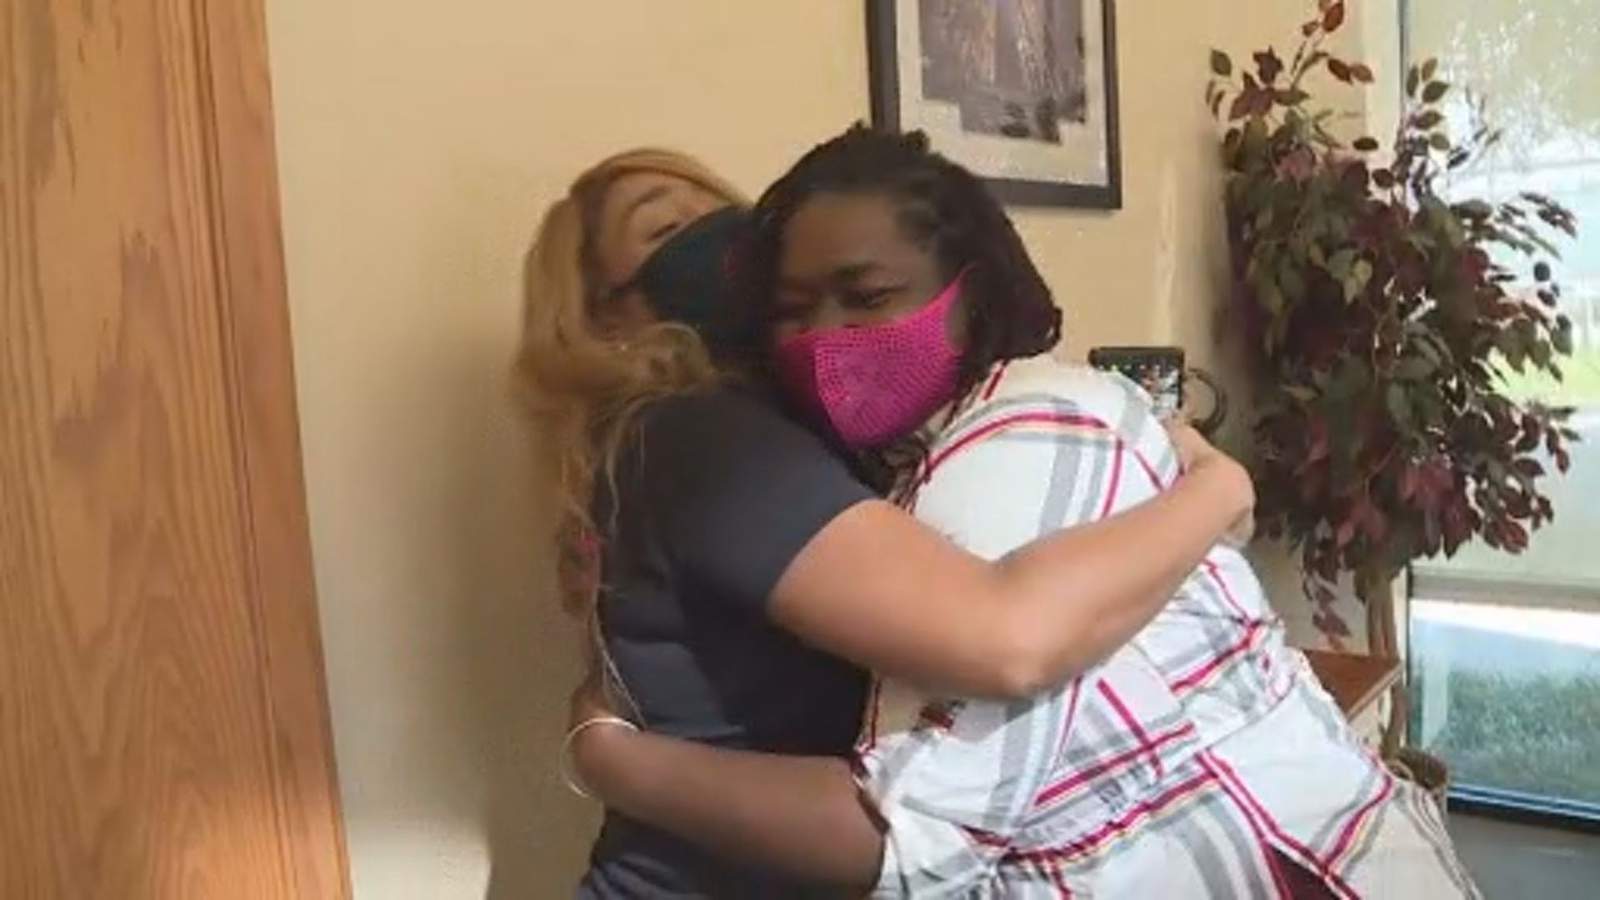 More help available for families facing eviction in Harris County